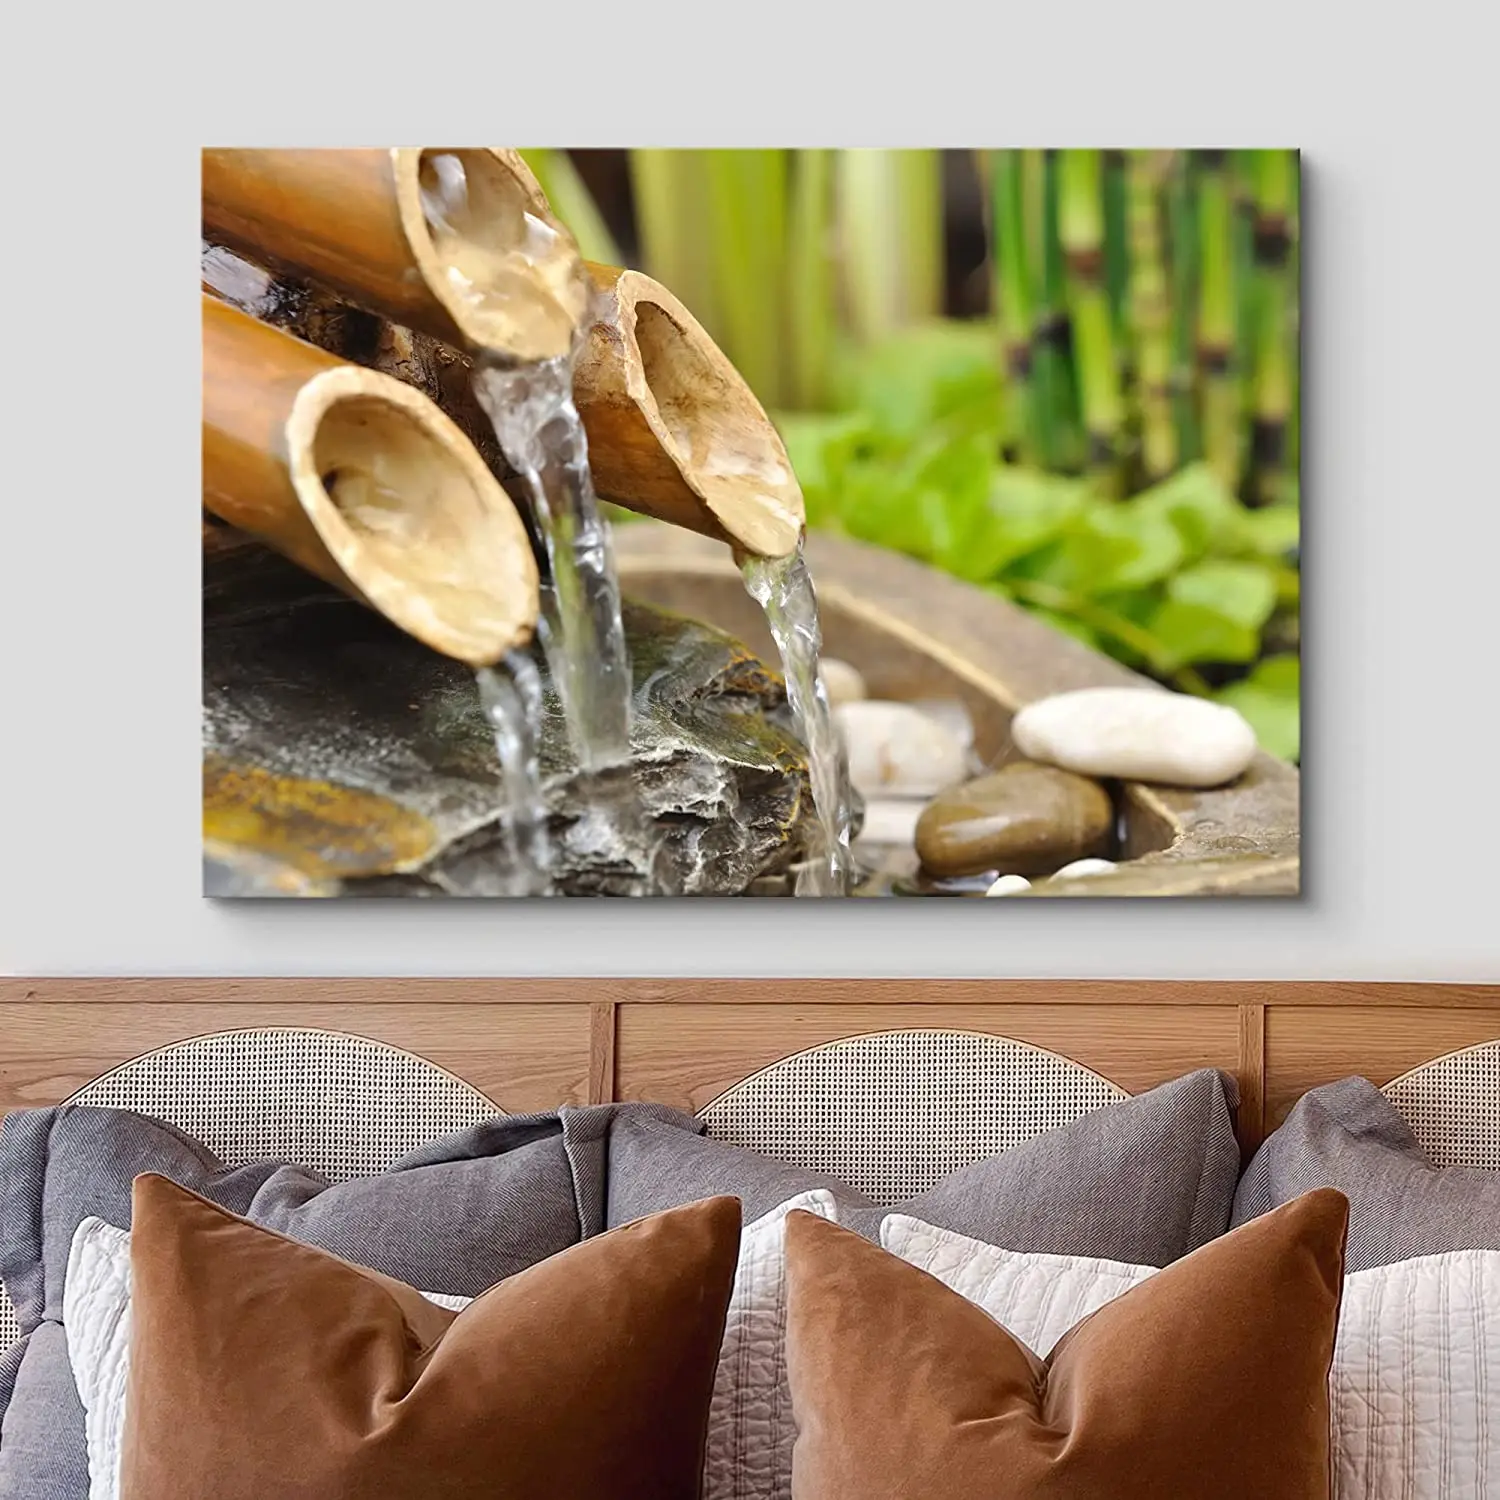 

Zen Green Bamboo Flower Massage Stone Spa Jungle Nature Posters Canvas Wall Art Pictures Home Decor Paintings Room Decorations